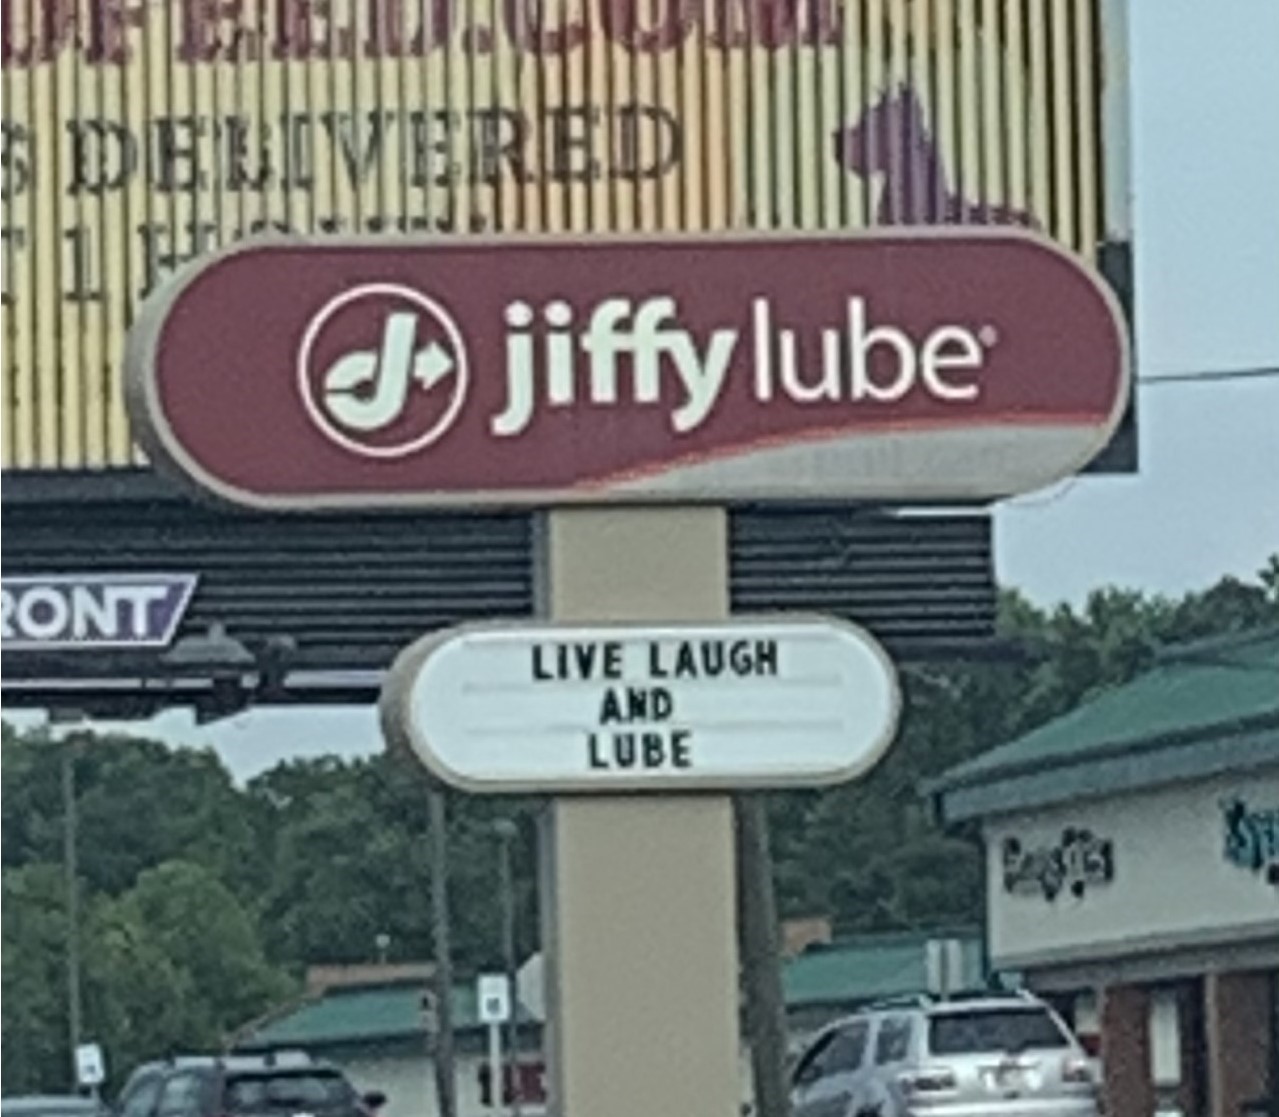 Jiffy Lube sign "Live Laugh Lube"